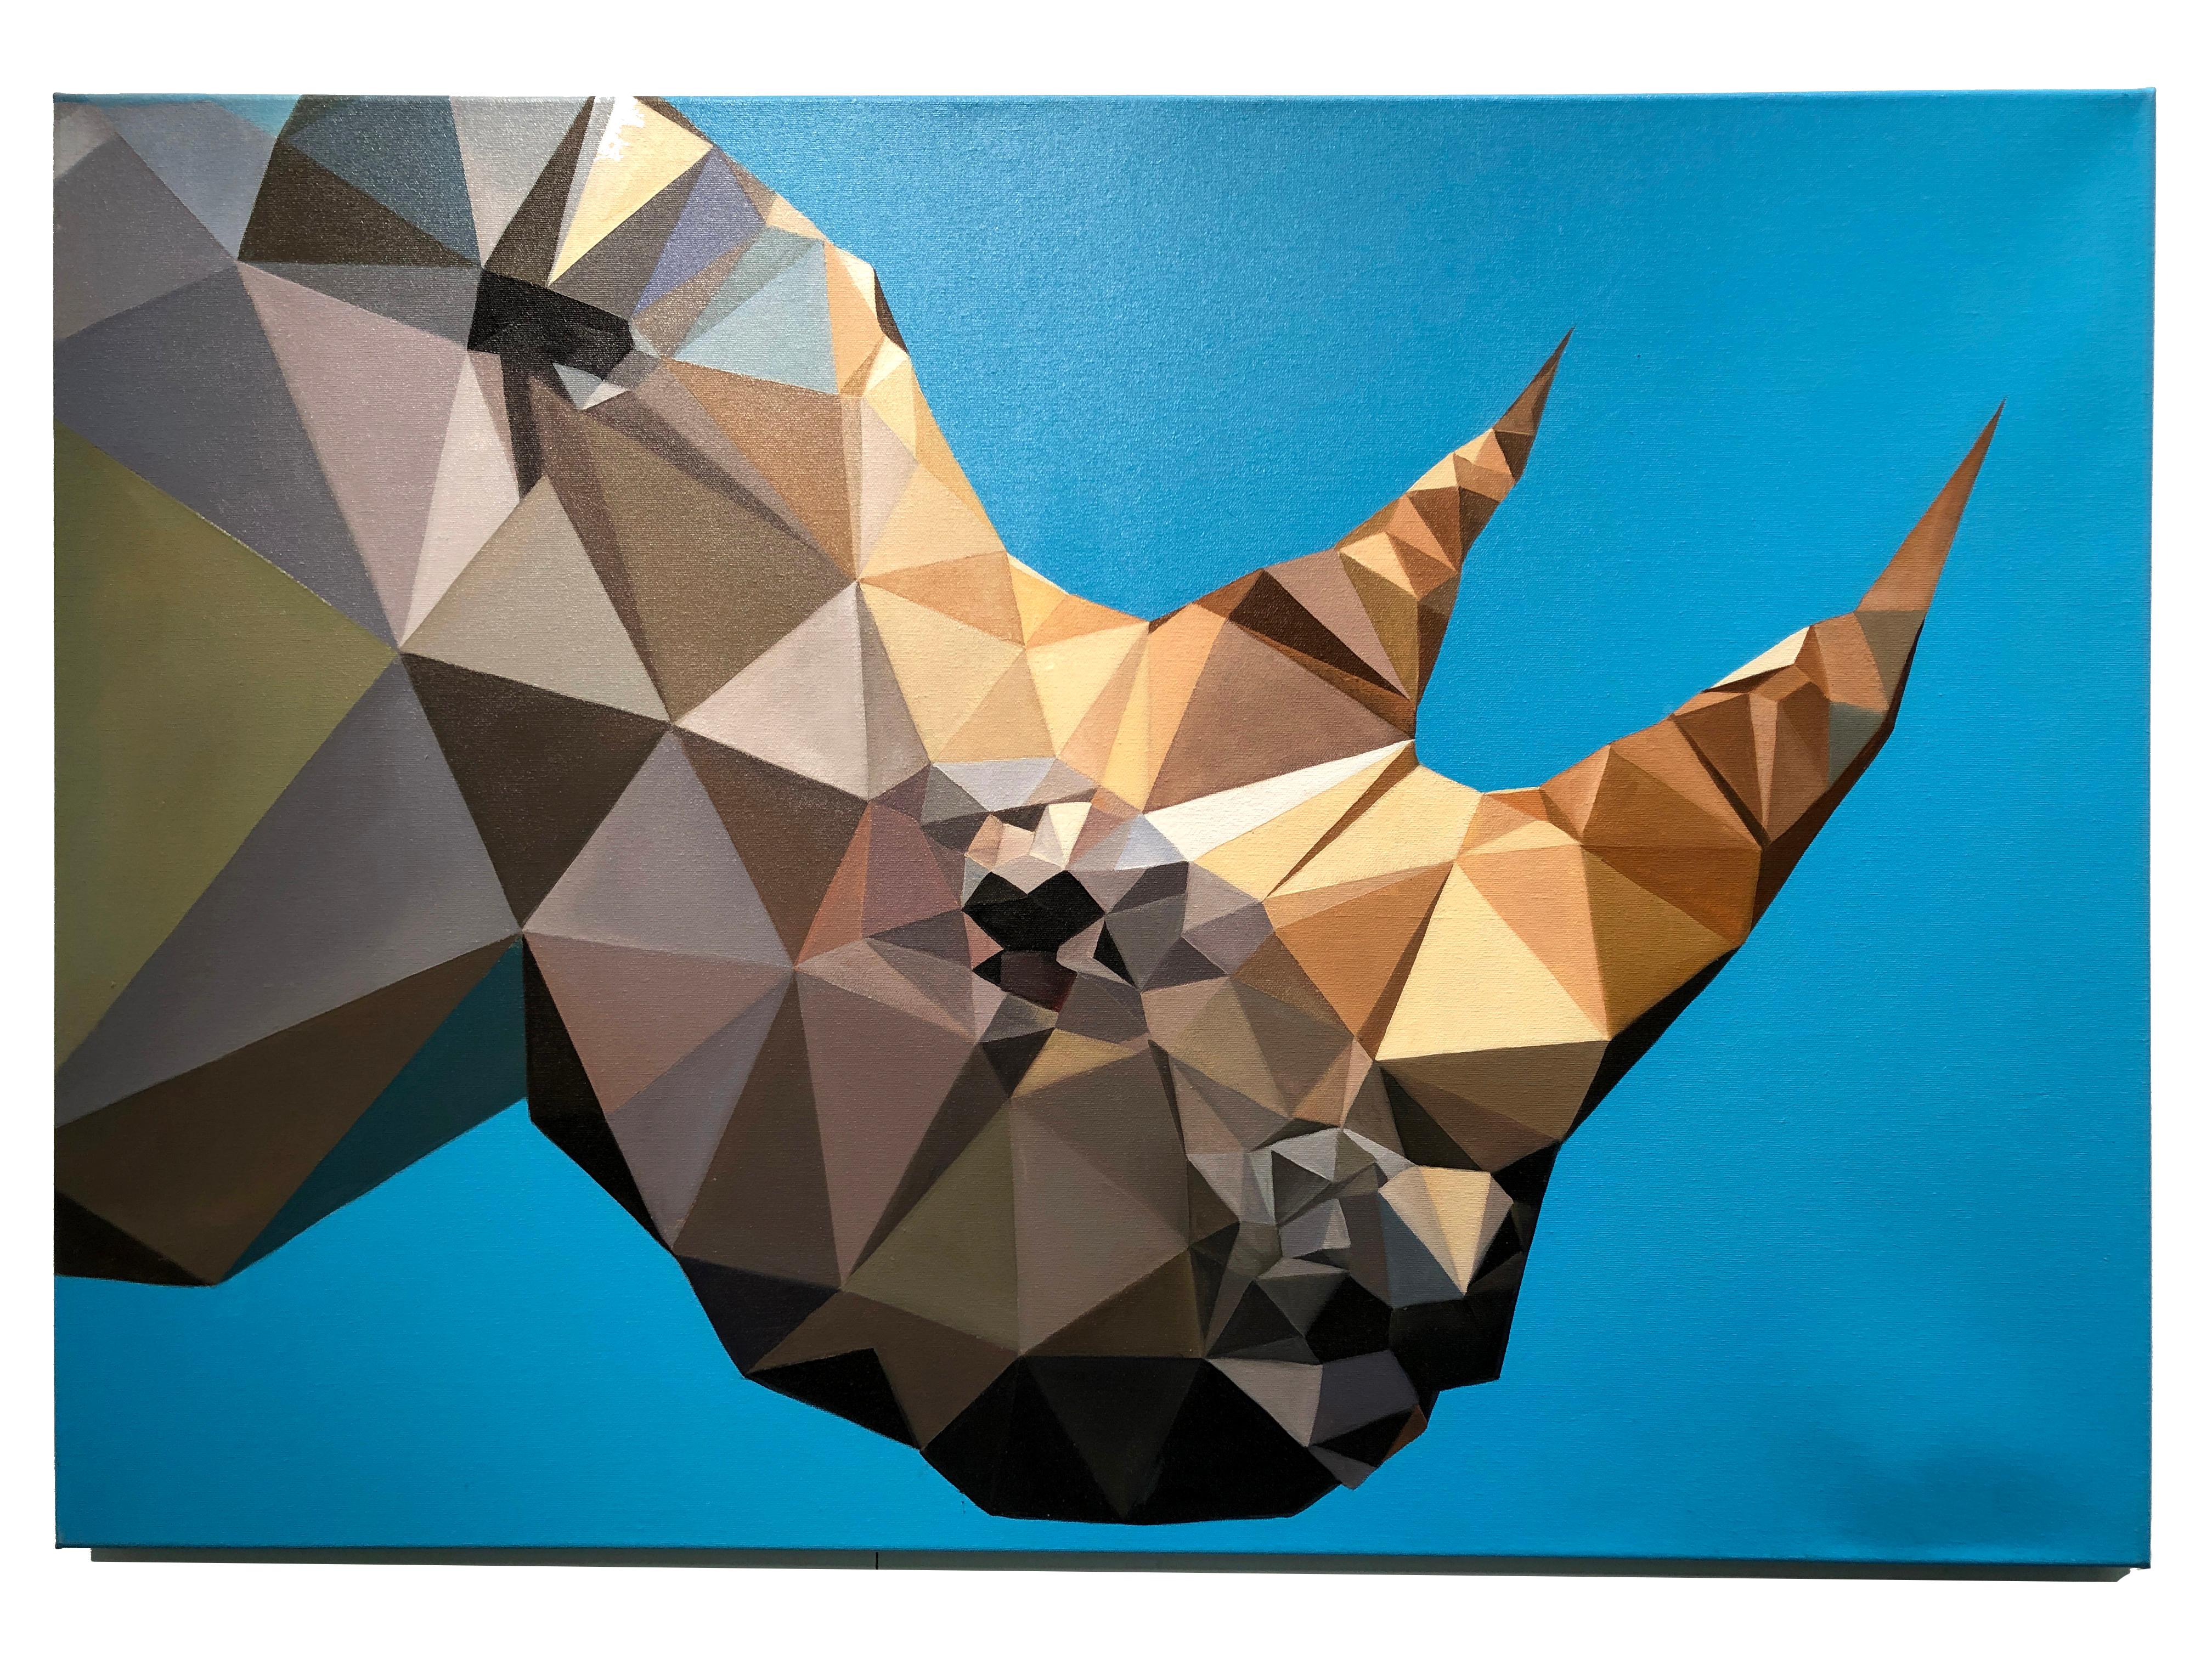  Rhino Blues by KARTEL Oil on canvas pop art triangulated, animal painting 